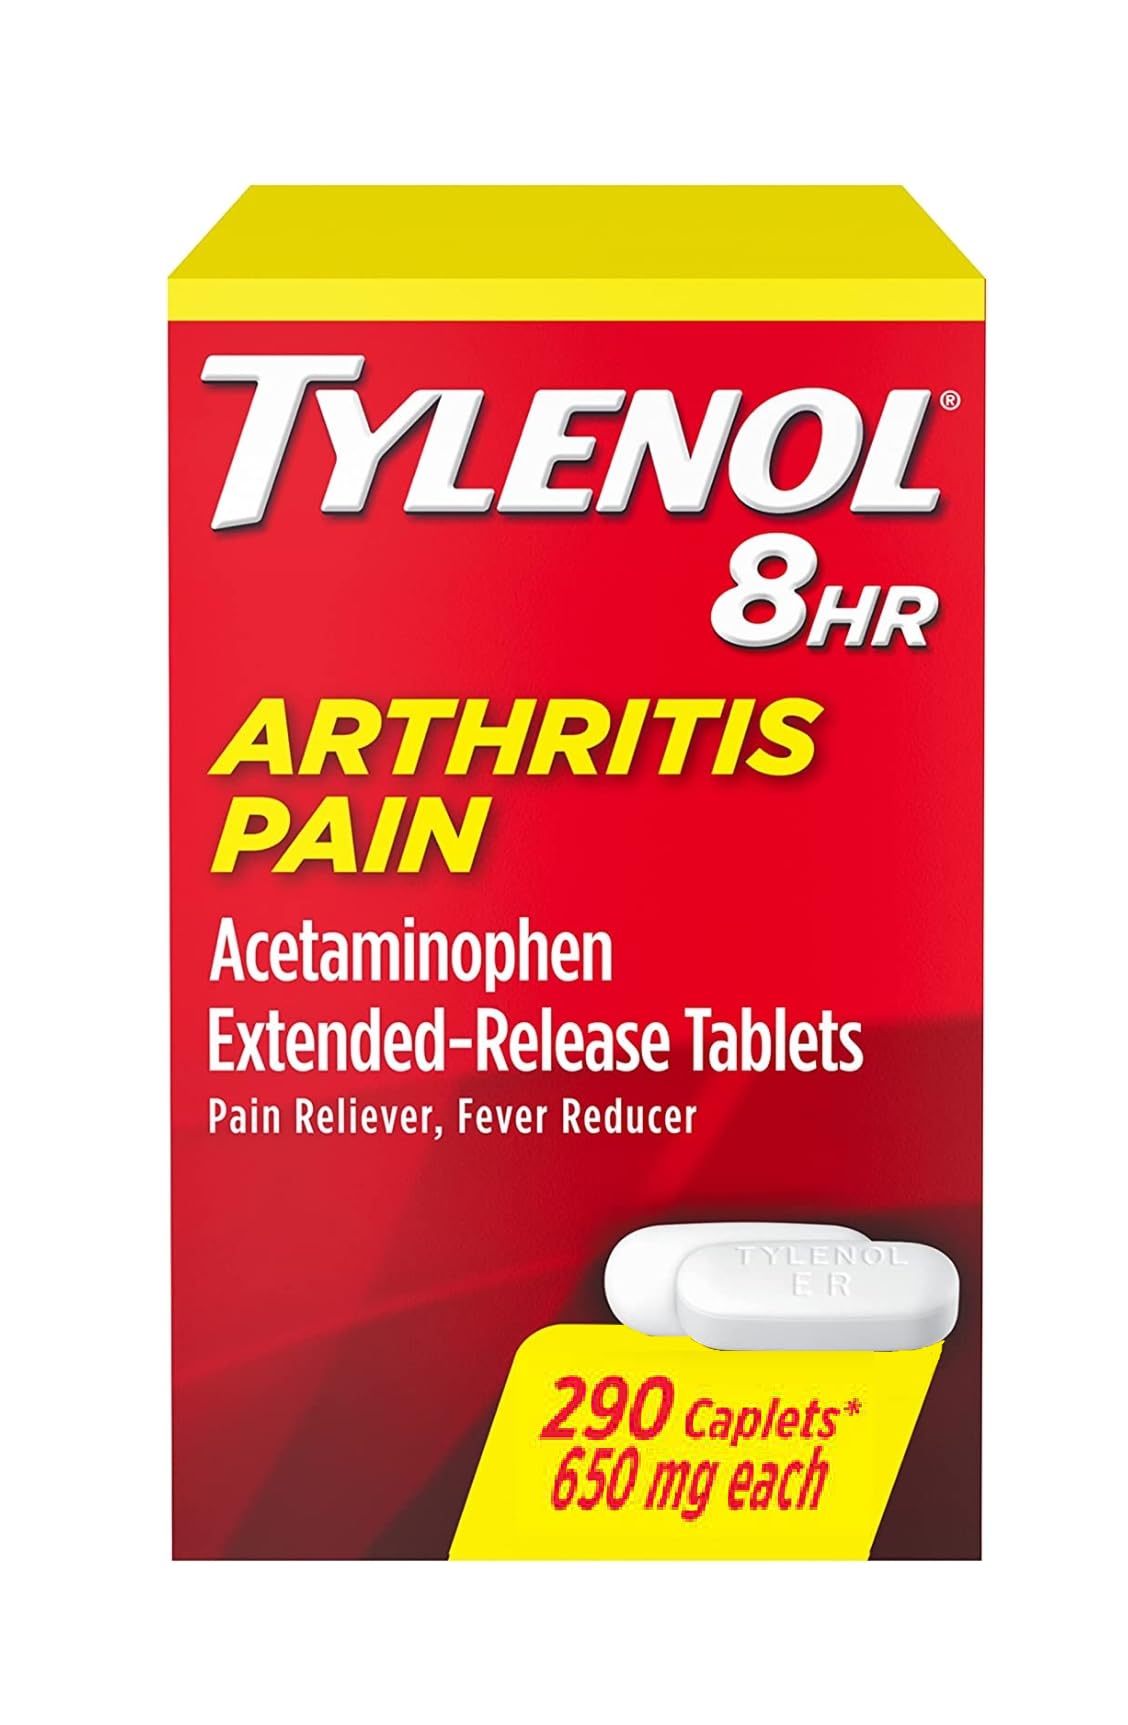 Tylenol Arthritis Pain - Acetaminophen Extended Release Pain Reliver - 290 Caplets 650 mg Each